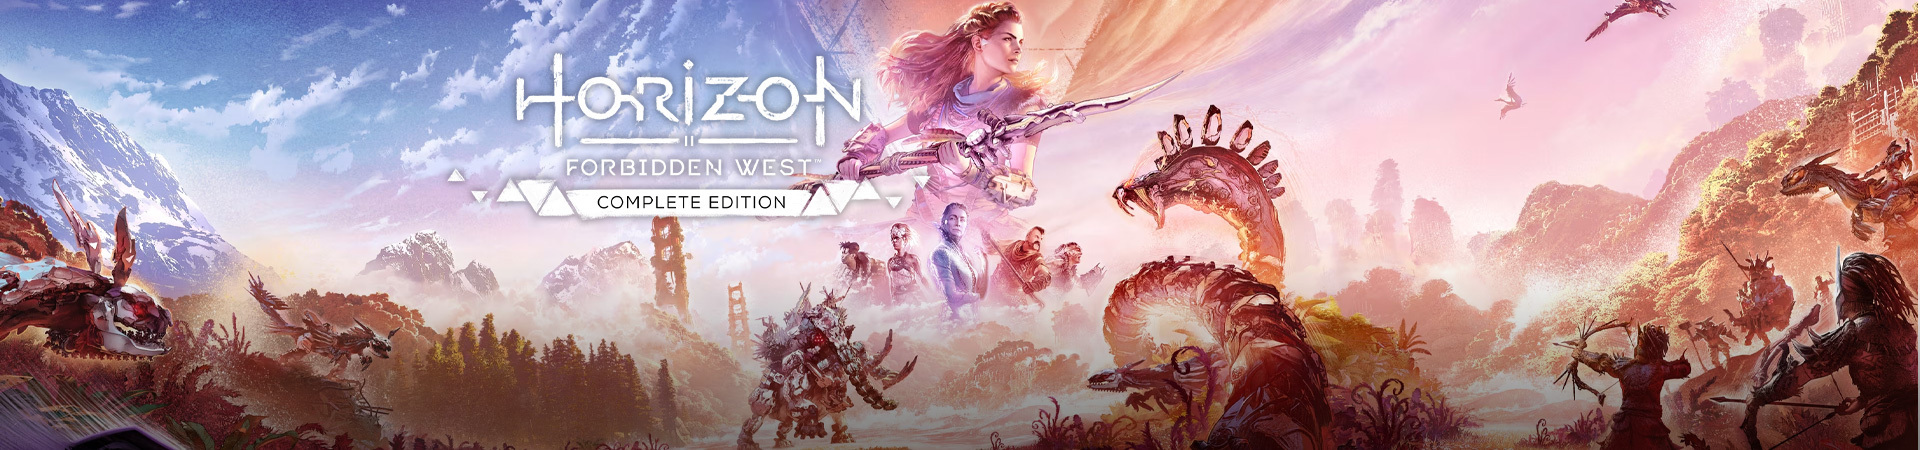 Horizon Forbidden West™ Complete Edition - <b><img class="img-dk "  src="/images/icon-serialfor-steam.png" width="" height="" title="Buyers receive a key for Steam to redeem, install &amp; play" /><img class="img-lt "  src="/images/icon-serialfor-steam-lt.png" width="" height="" title="Buyers receive a key for Steam to redeem, install &amp; play" /></b><span> Now available</span>